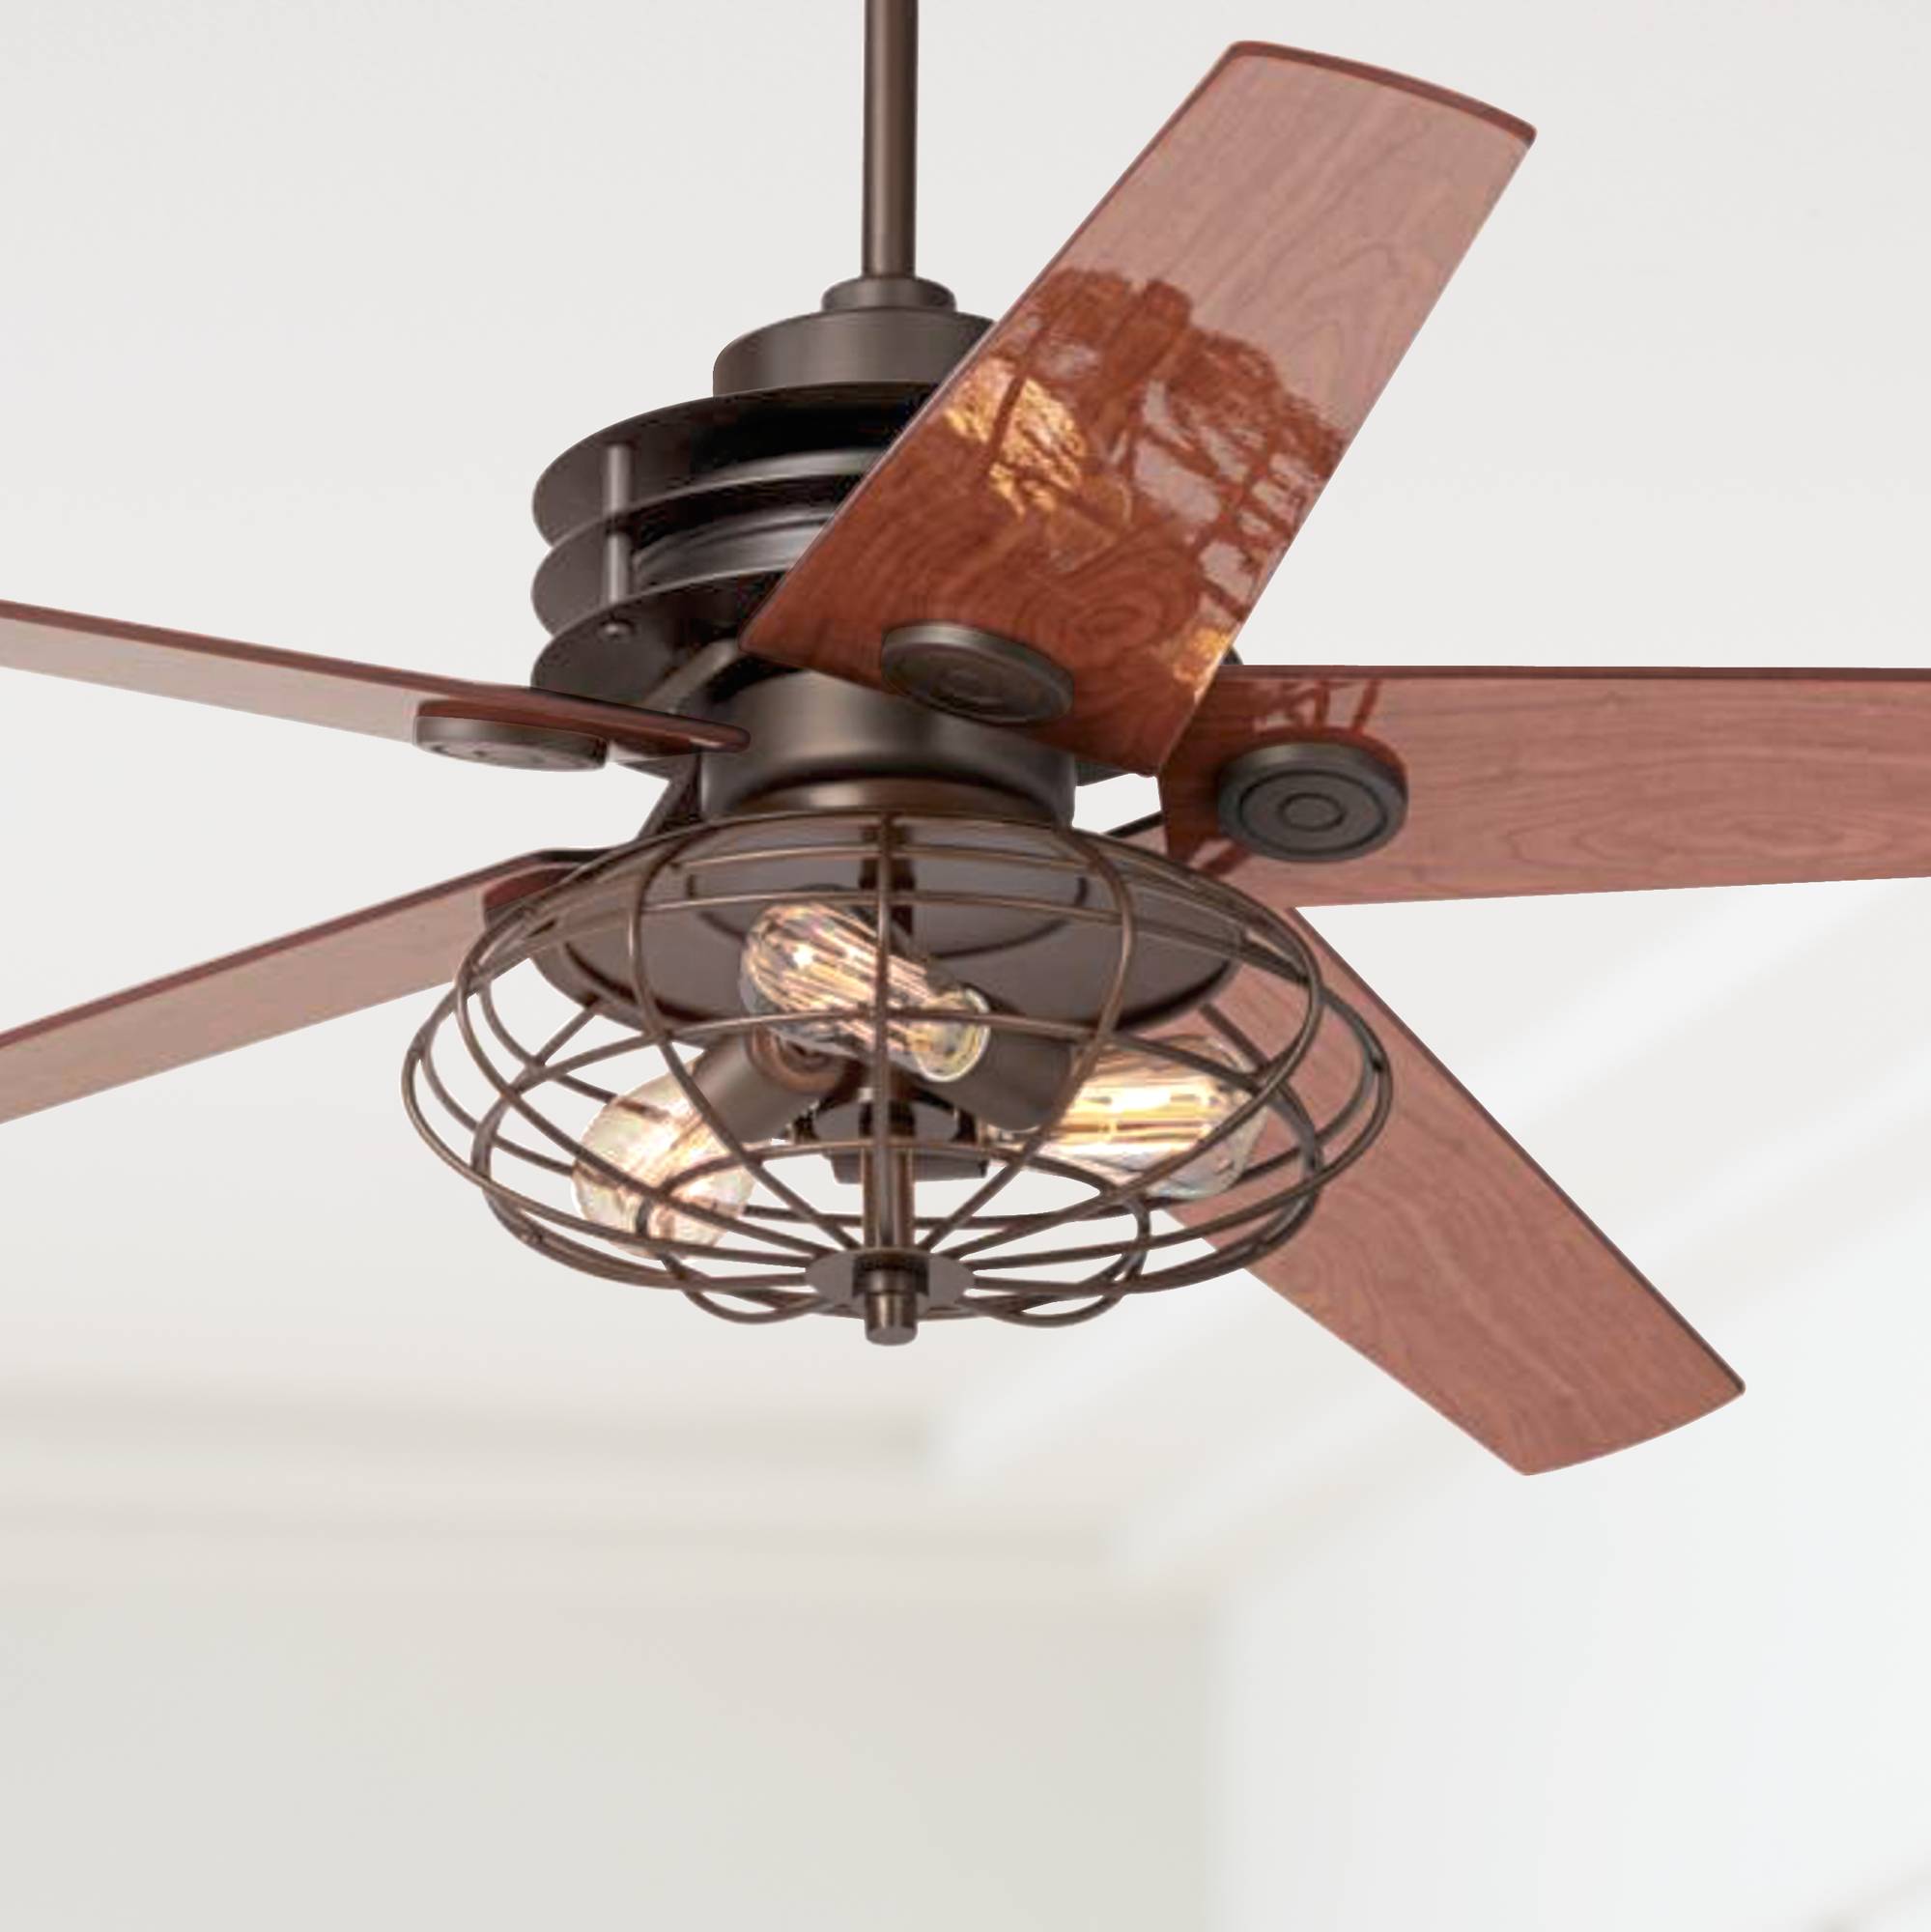 Rustic Industrial Ceiling Fans / Hunter Mill Valley 52 in. LED Indoor